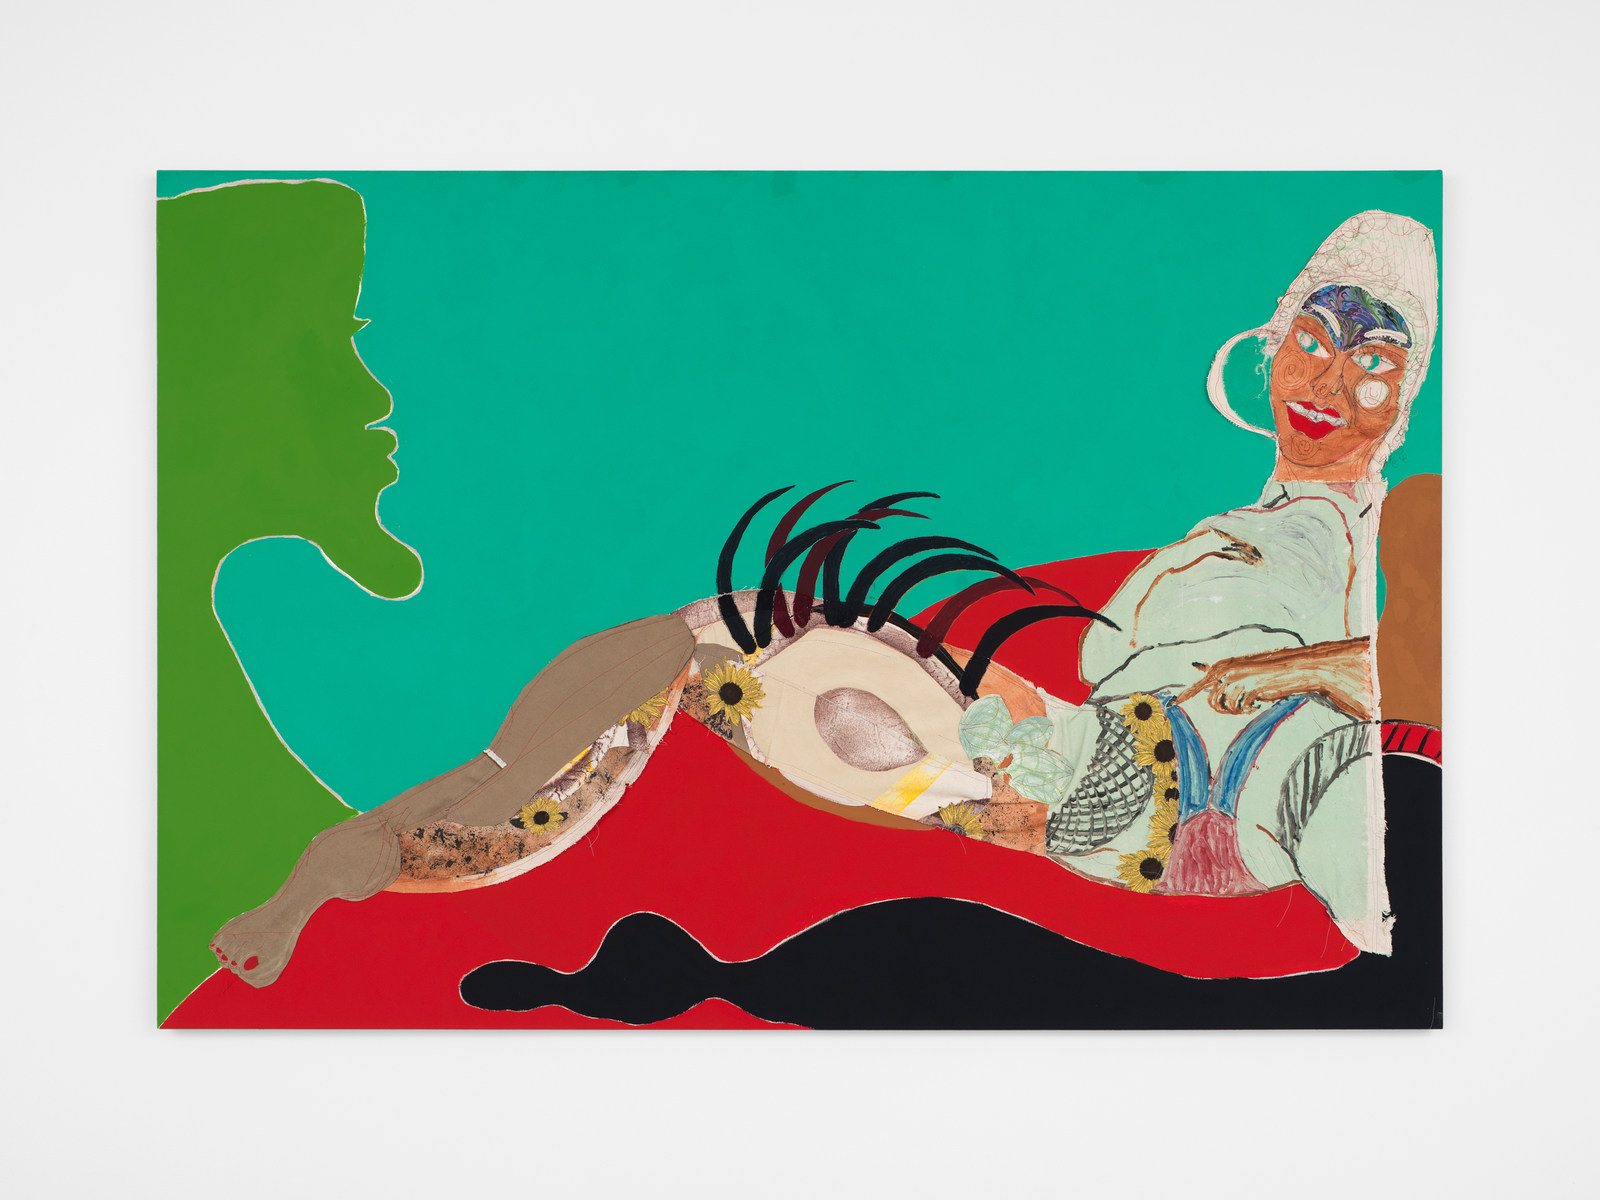 Tschabalala Self, Thigh, 2016 Painted canvas, fabric, oil, acrylic, and flashe on canvas 48 x 72 inches